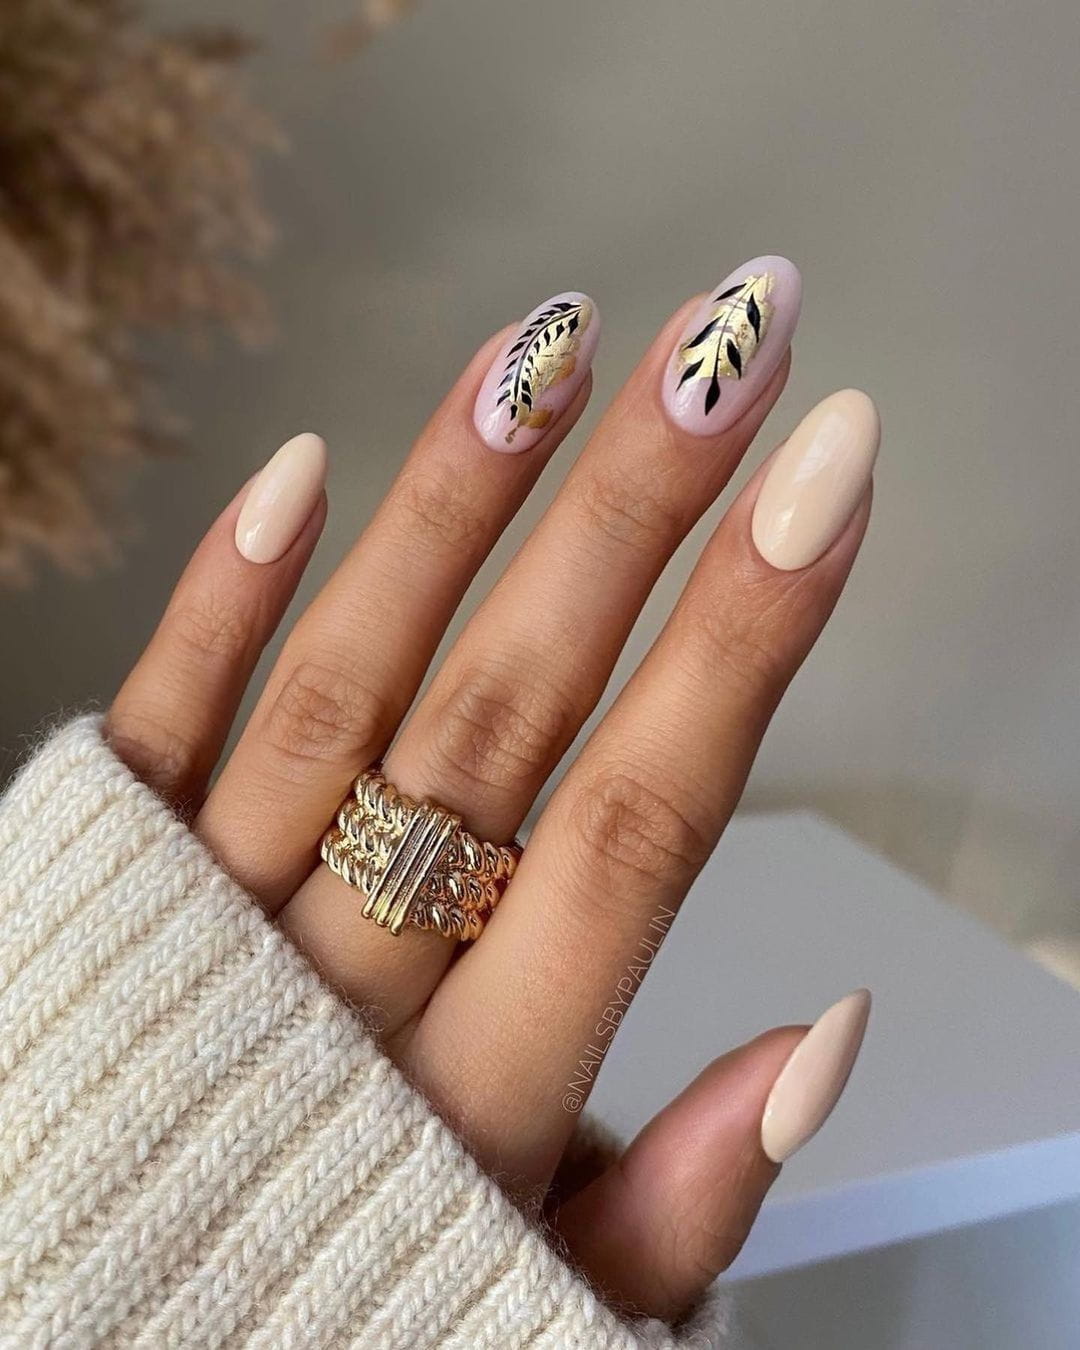 100+ Trendy And Cute Fall Nail Designs To Inspire You This Autumn In 2023 images 69